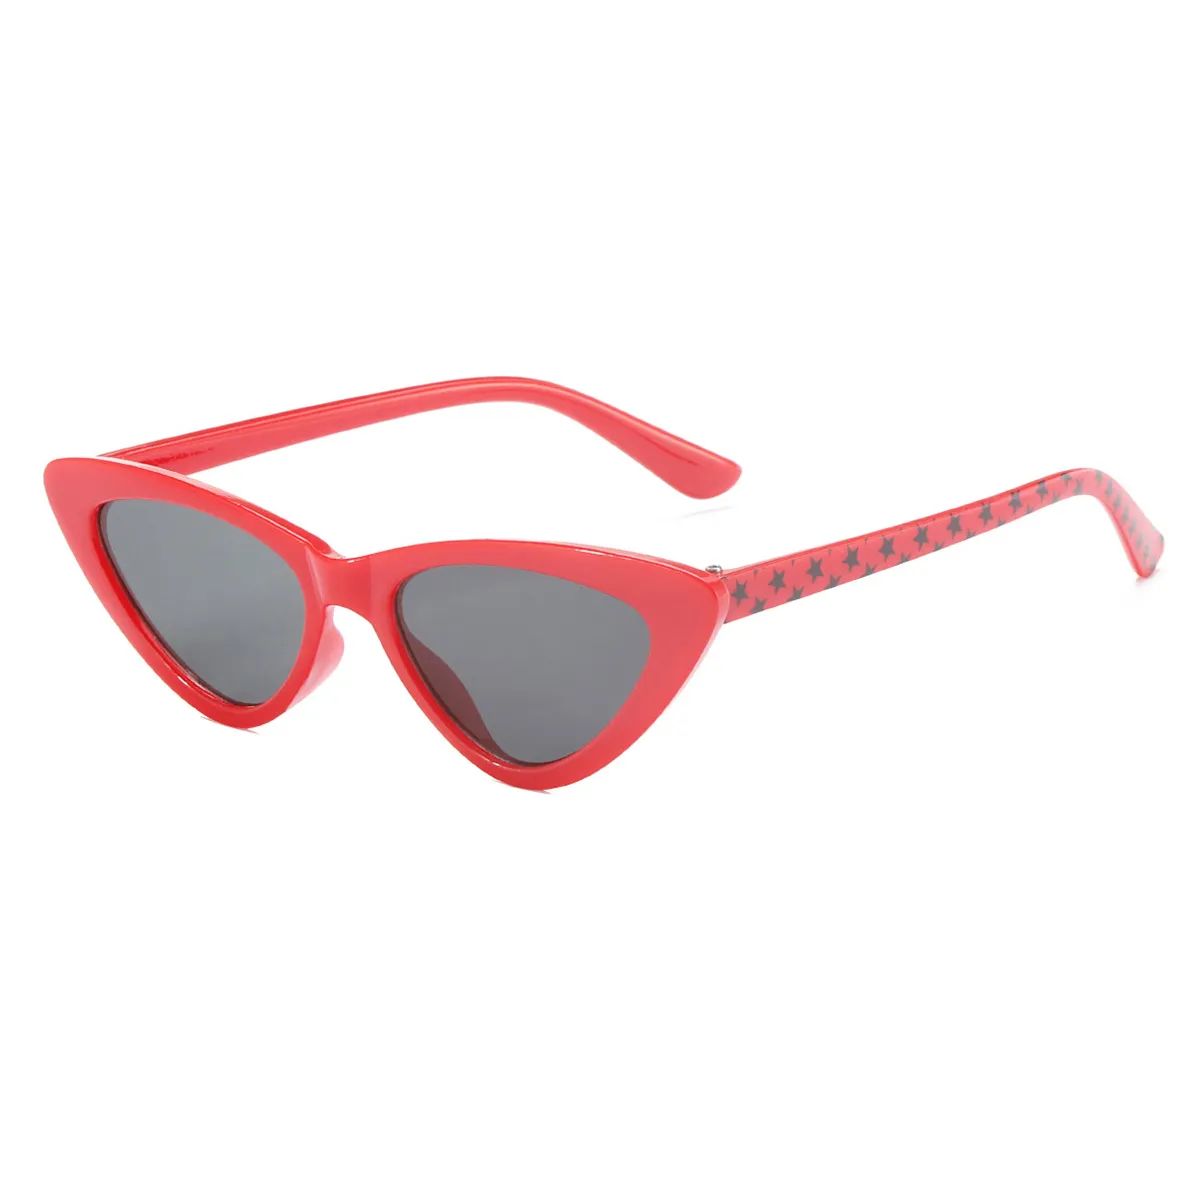 Women/Kid Cool Cat-eye Sunglasses (Packed in Flannel Bag, Random Color) Red big image 1